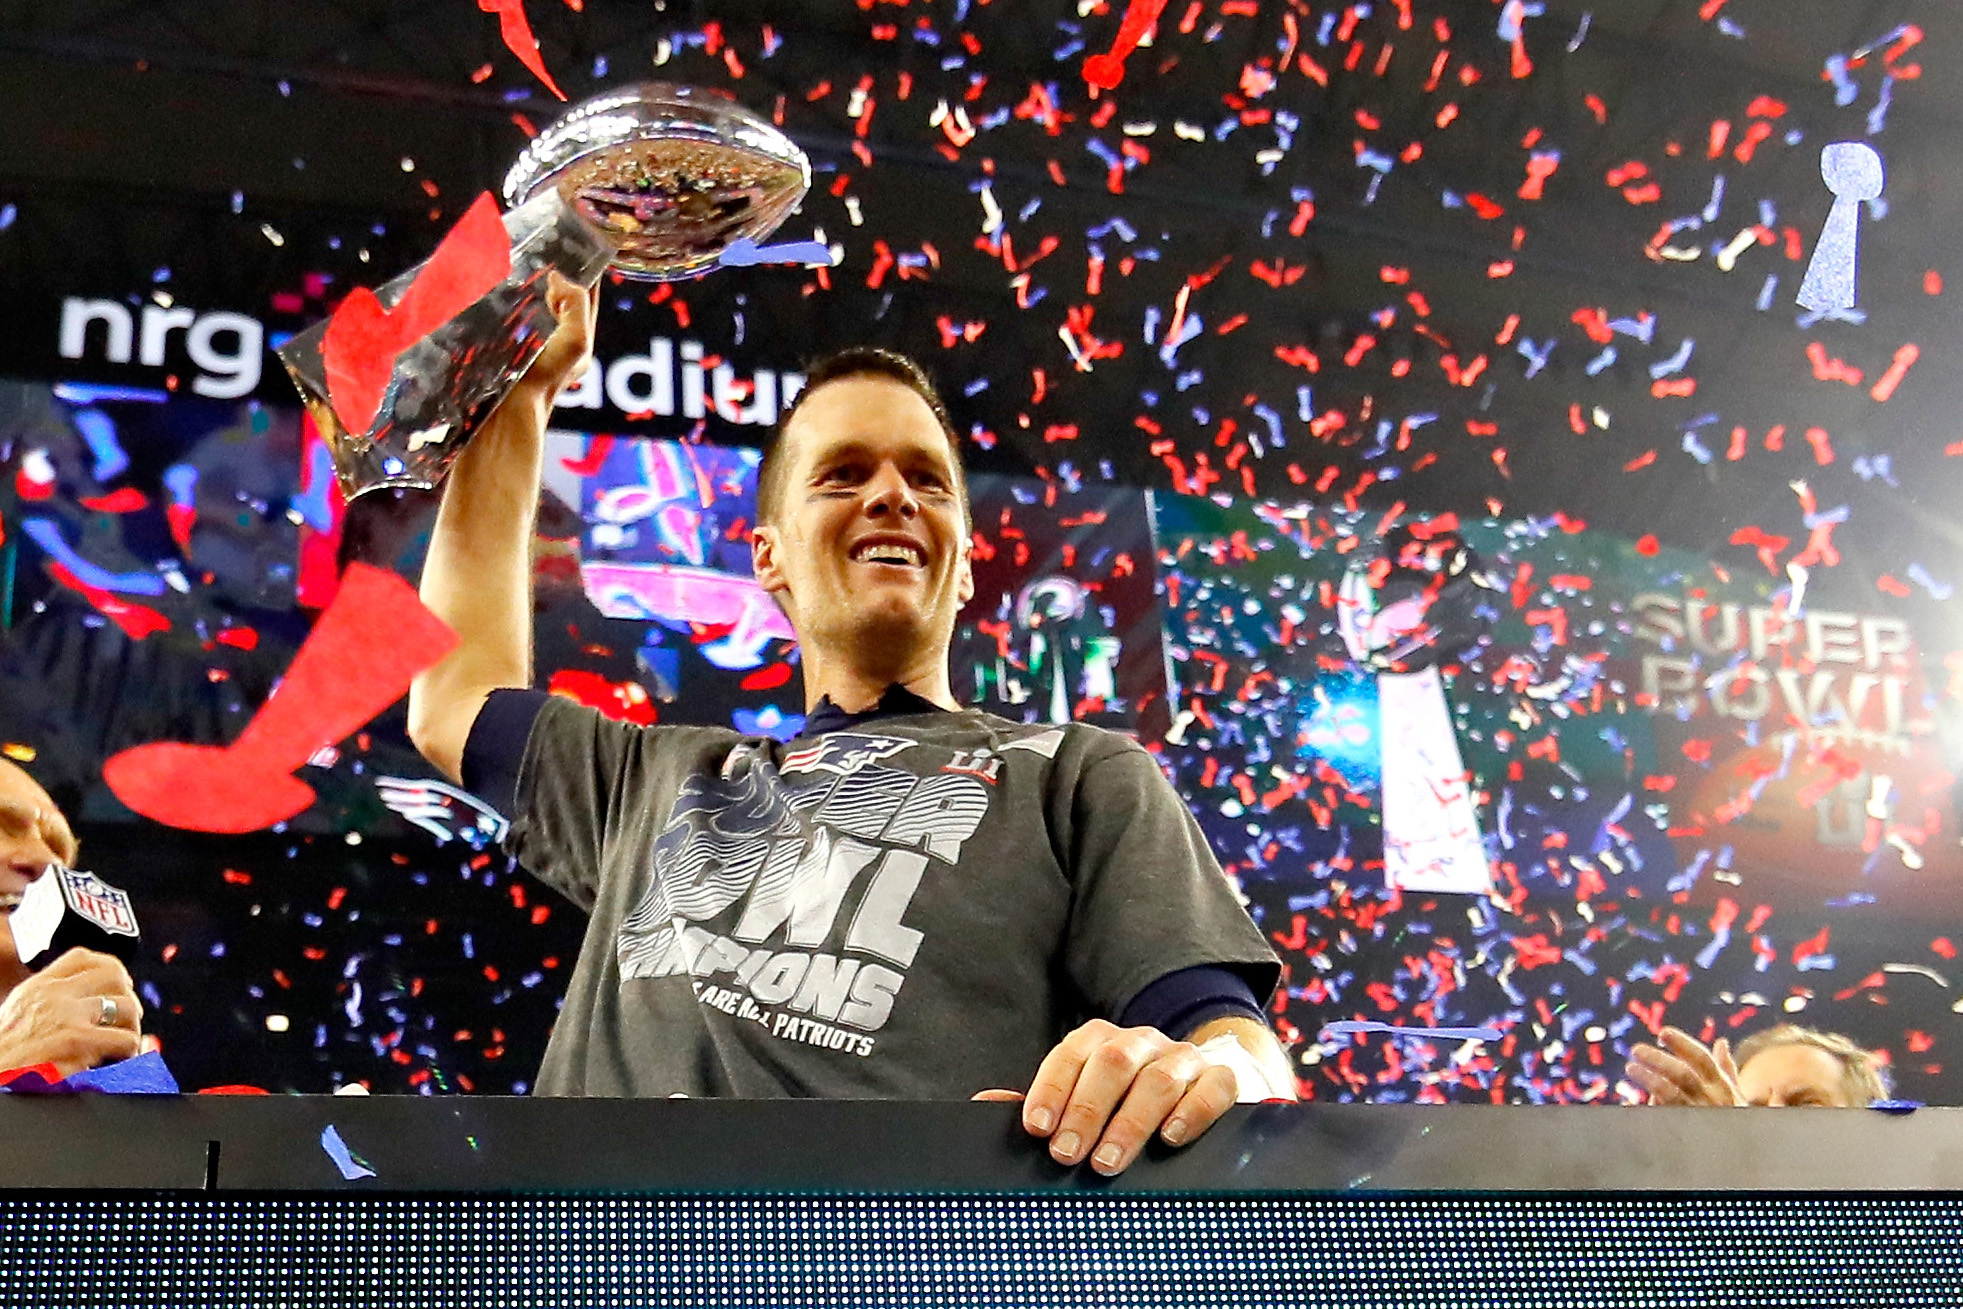 Tom Brady #12 of the New England Patriots celebrates with the Vince Lombardi Trophy after defeating the Atlanta Falcons during Super Bowl 51 at NRG Stadium on February 5, 2017 in Houston, Texas. (Kevin C. Cox—Getty Images)